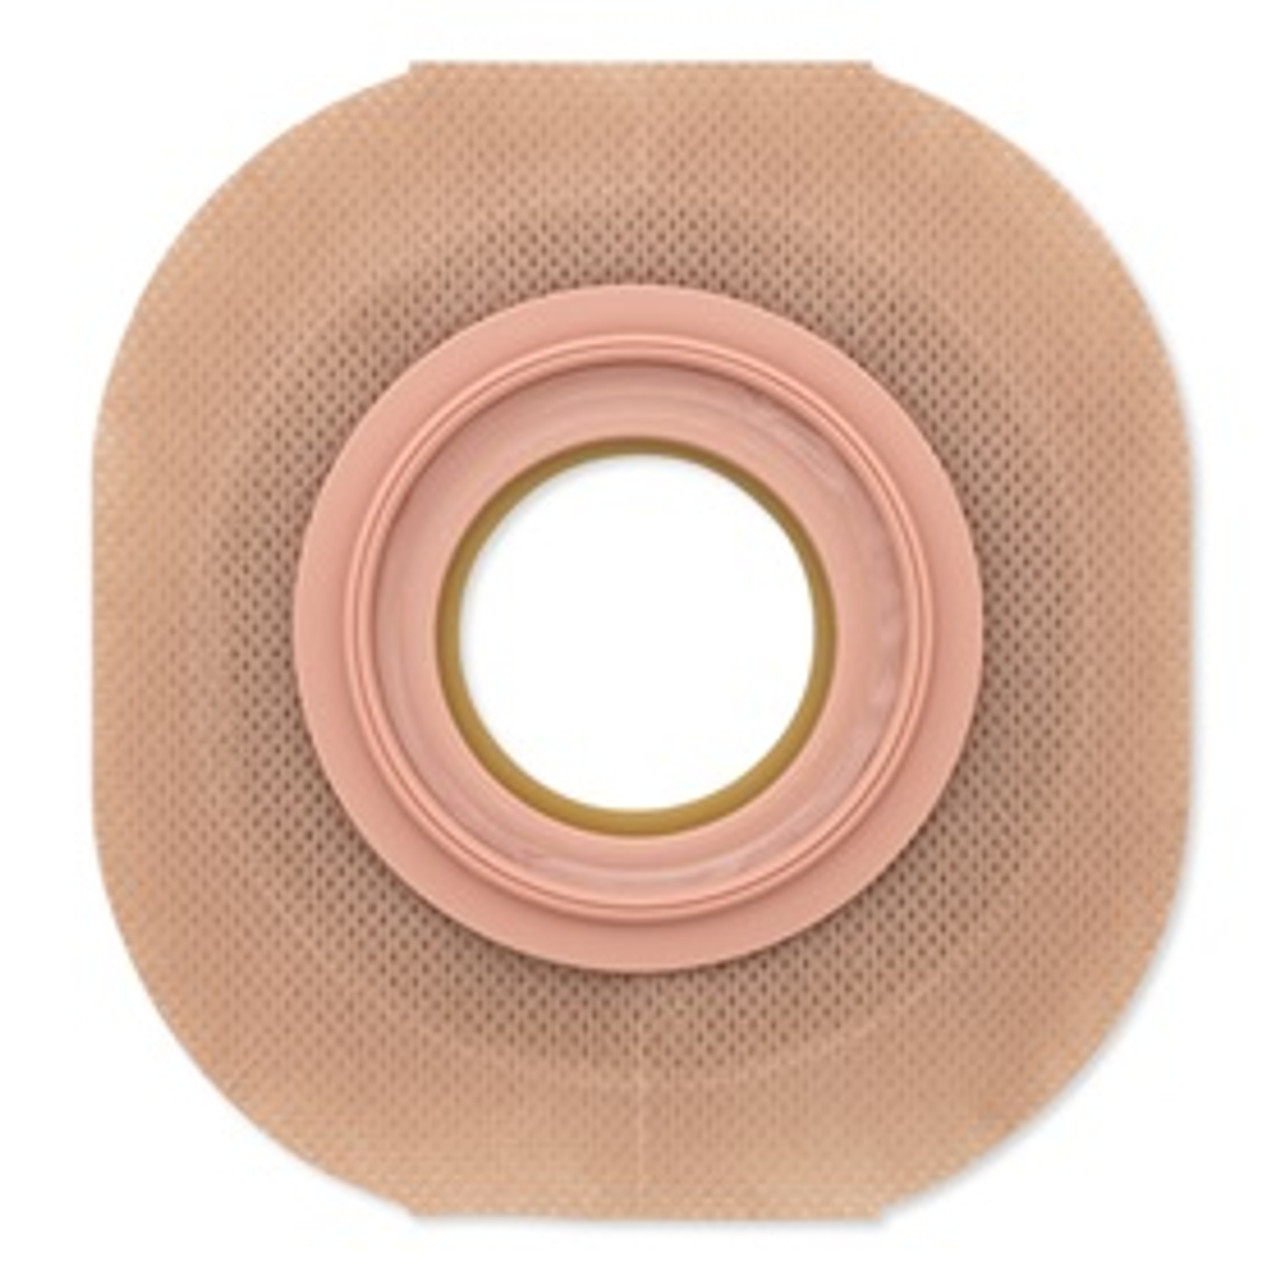 Hollister 13910 BX/5 NEW IMAGE FLEXTEND CONVEX SKIN Barrier WITH TAPERED BORDER, 2 3/4" (70MM) FLANGE, PRE-CUT 1 3/4" (44MM)